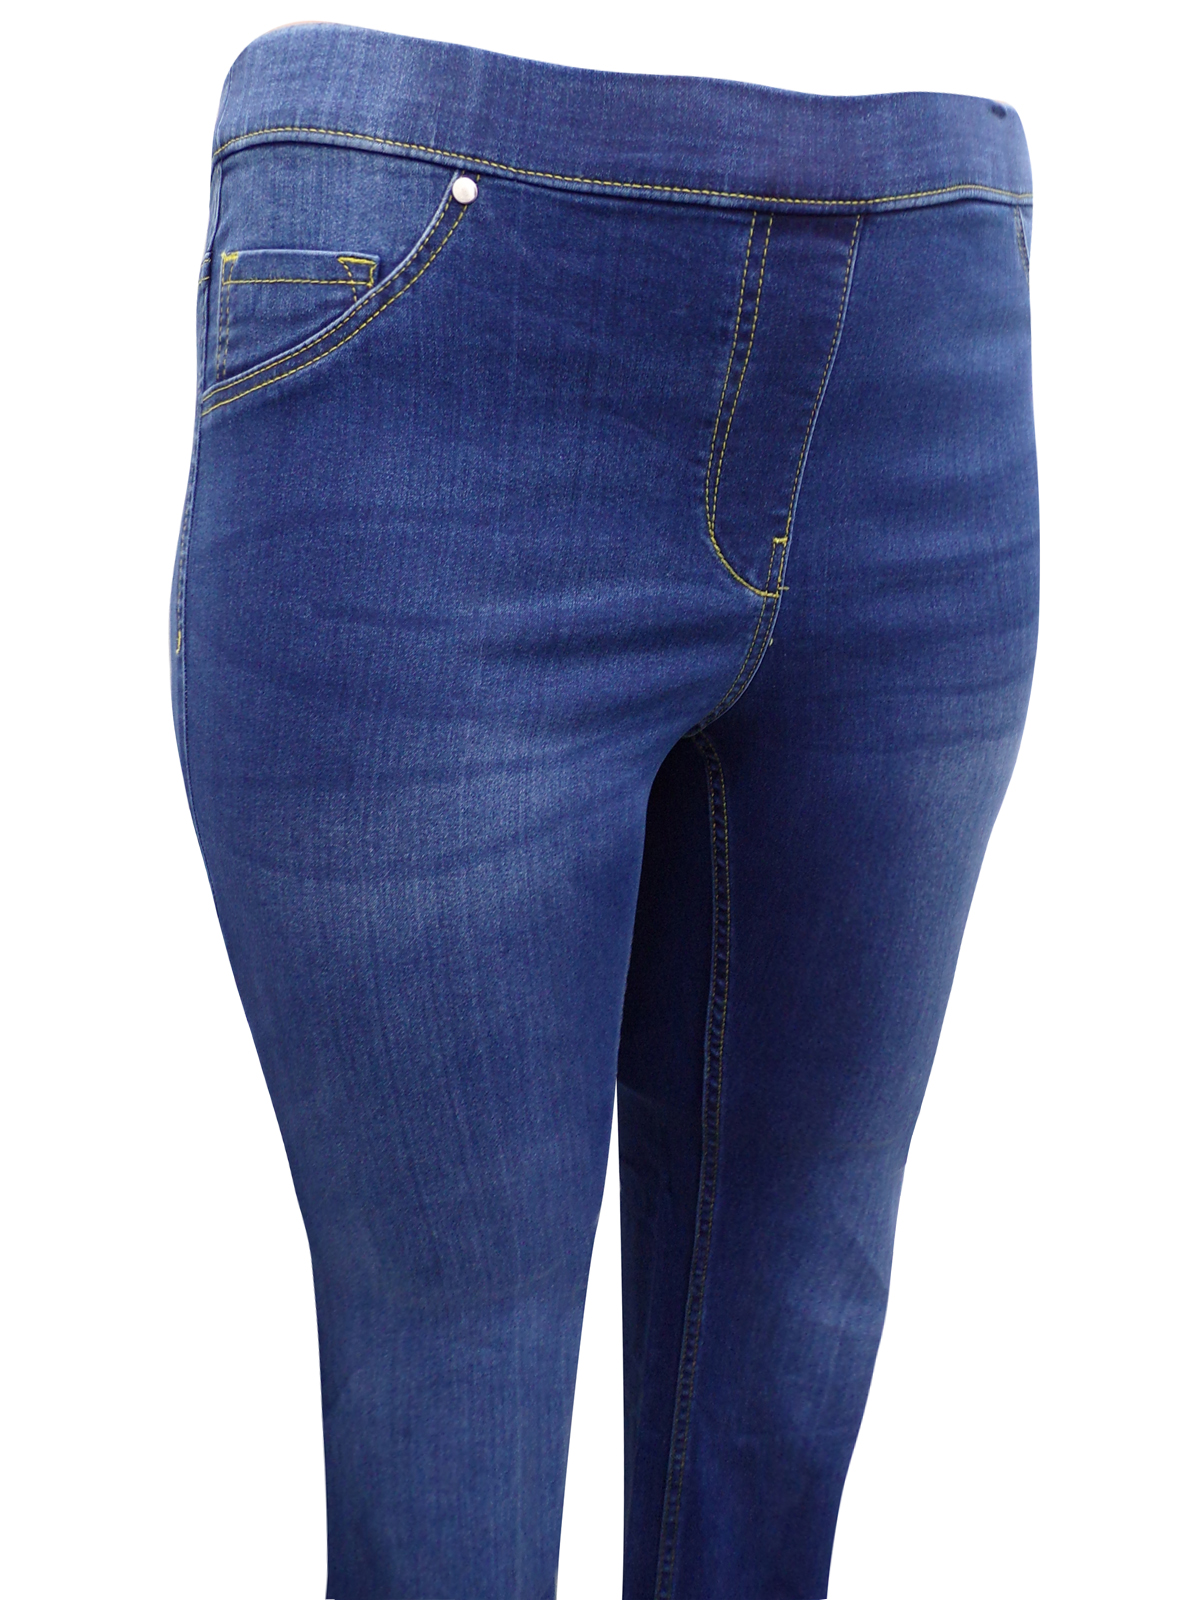 H&M DENIM Pull On Skinny Fit Jeggings - Plus Size 18 to 26